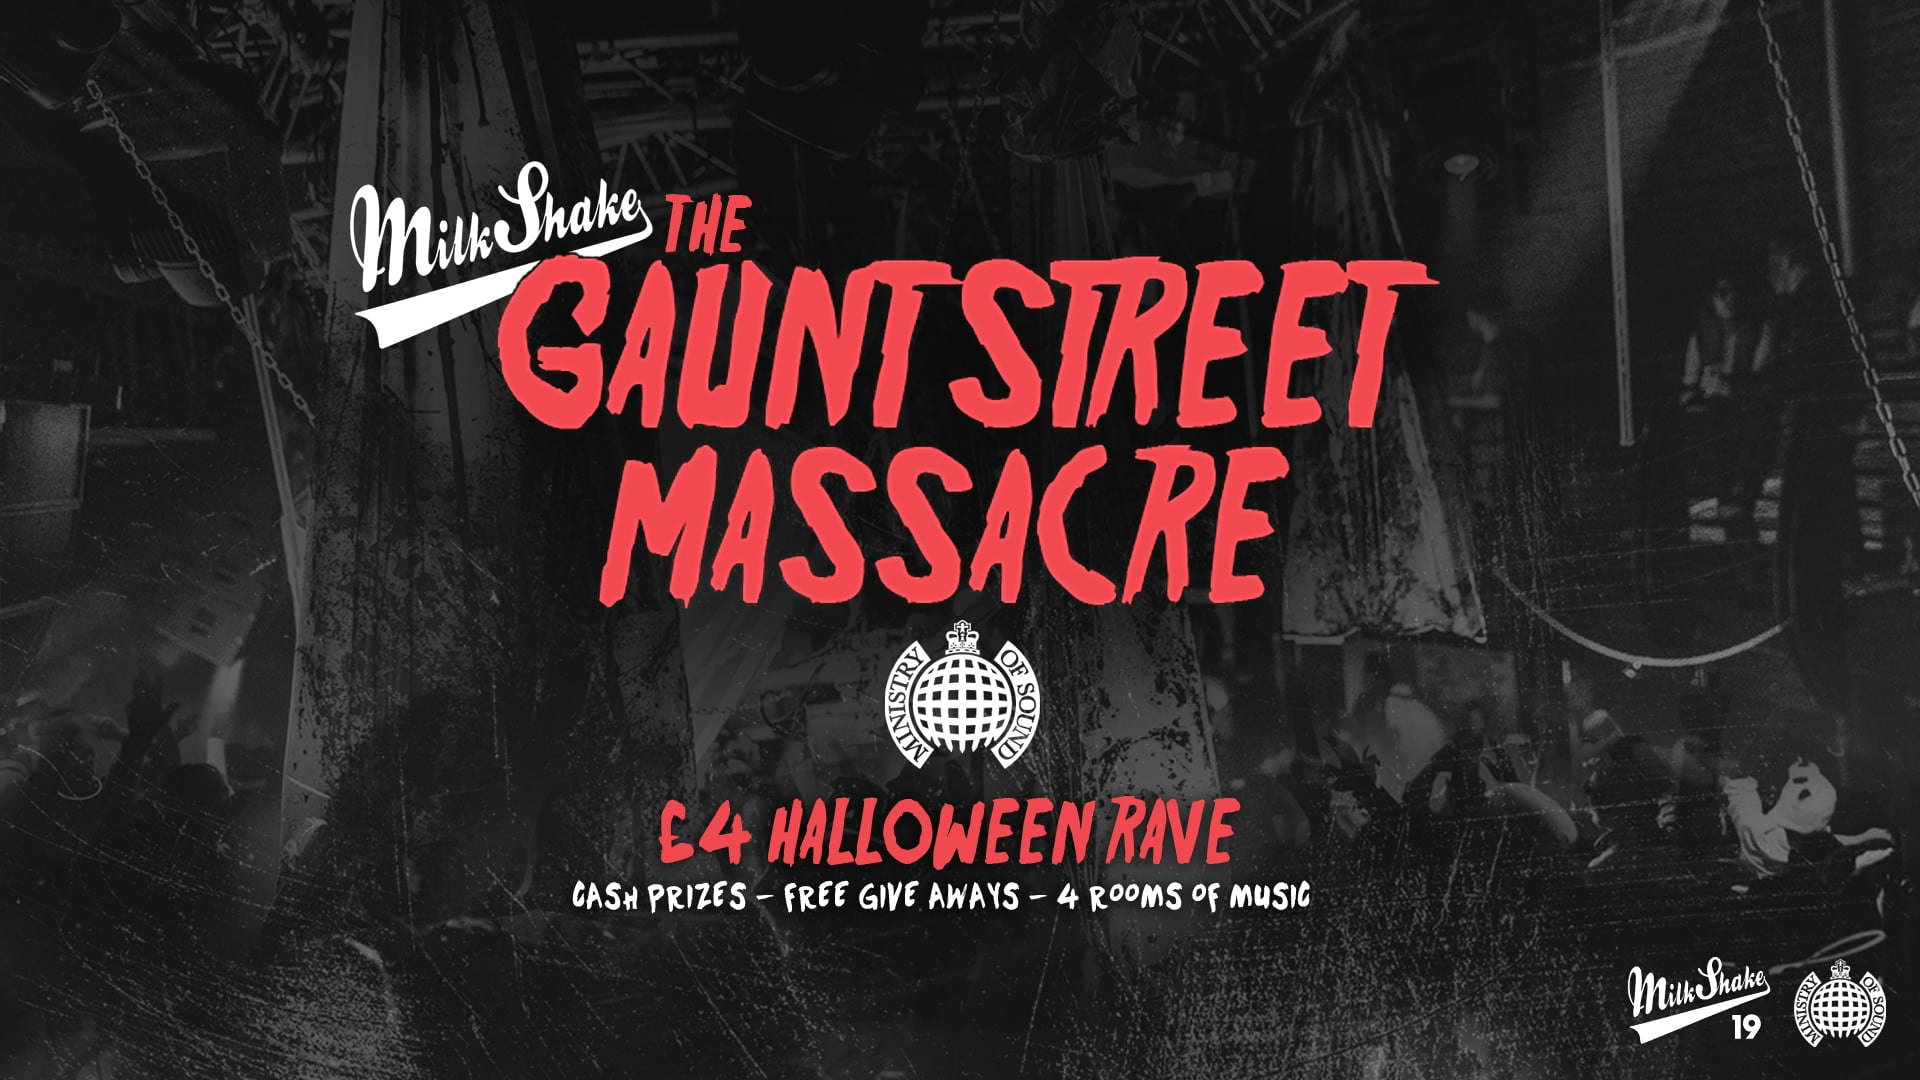 ⛔️ SOLD OUT ⛔️ The Gaunt Street Massacre 2022  👻 – Milkshake, Ministry of Sound – Halloween Rave! ⛔️ SOLD OUT ⛔️